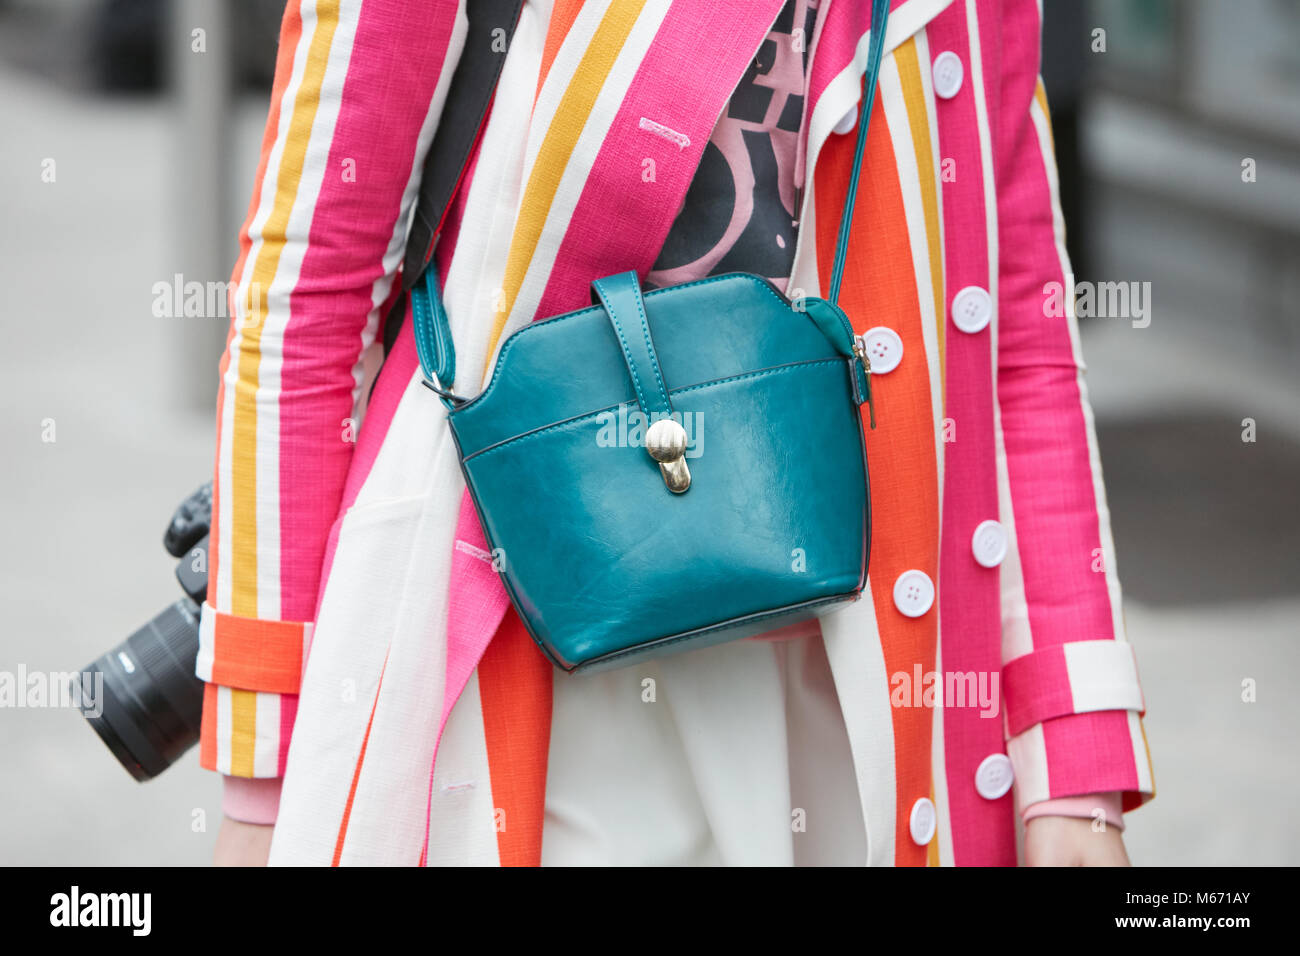 MILAN - FEBRUARY 25: Woman photographer with pink, white, yellow and orange striped jacket and blue leather bag before Emporio Armani fashion show, Mi Stock Photo